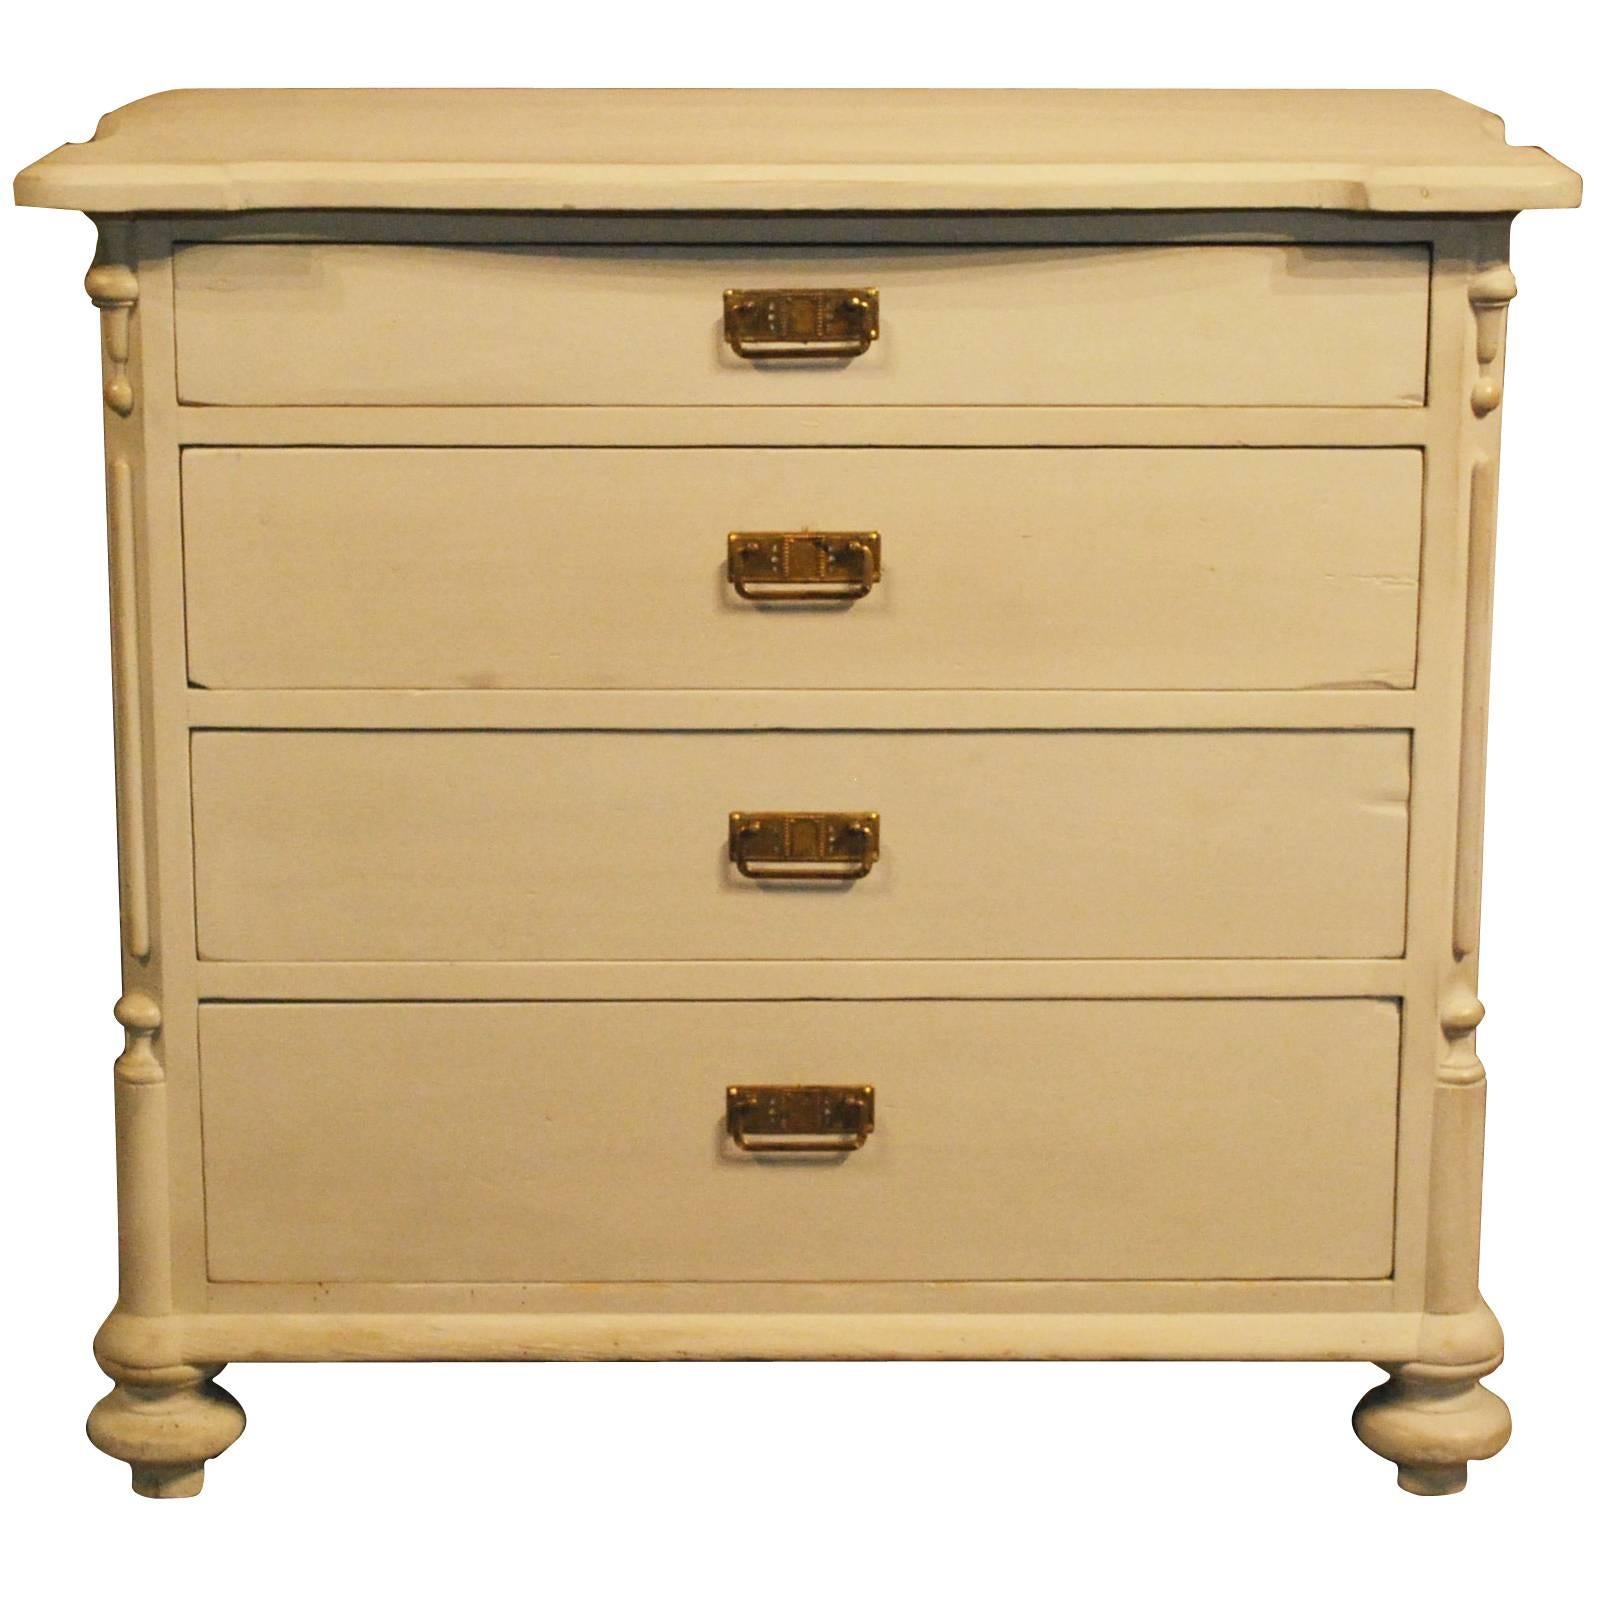 Antique Gustavian Style Painted Chest, circa 1880